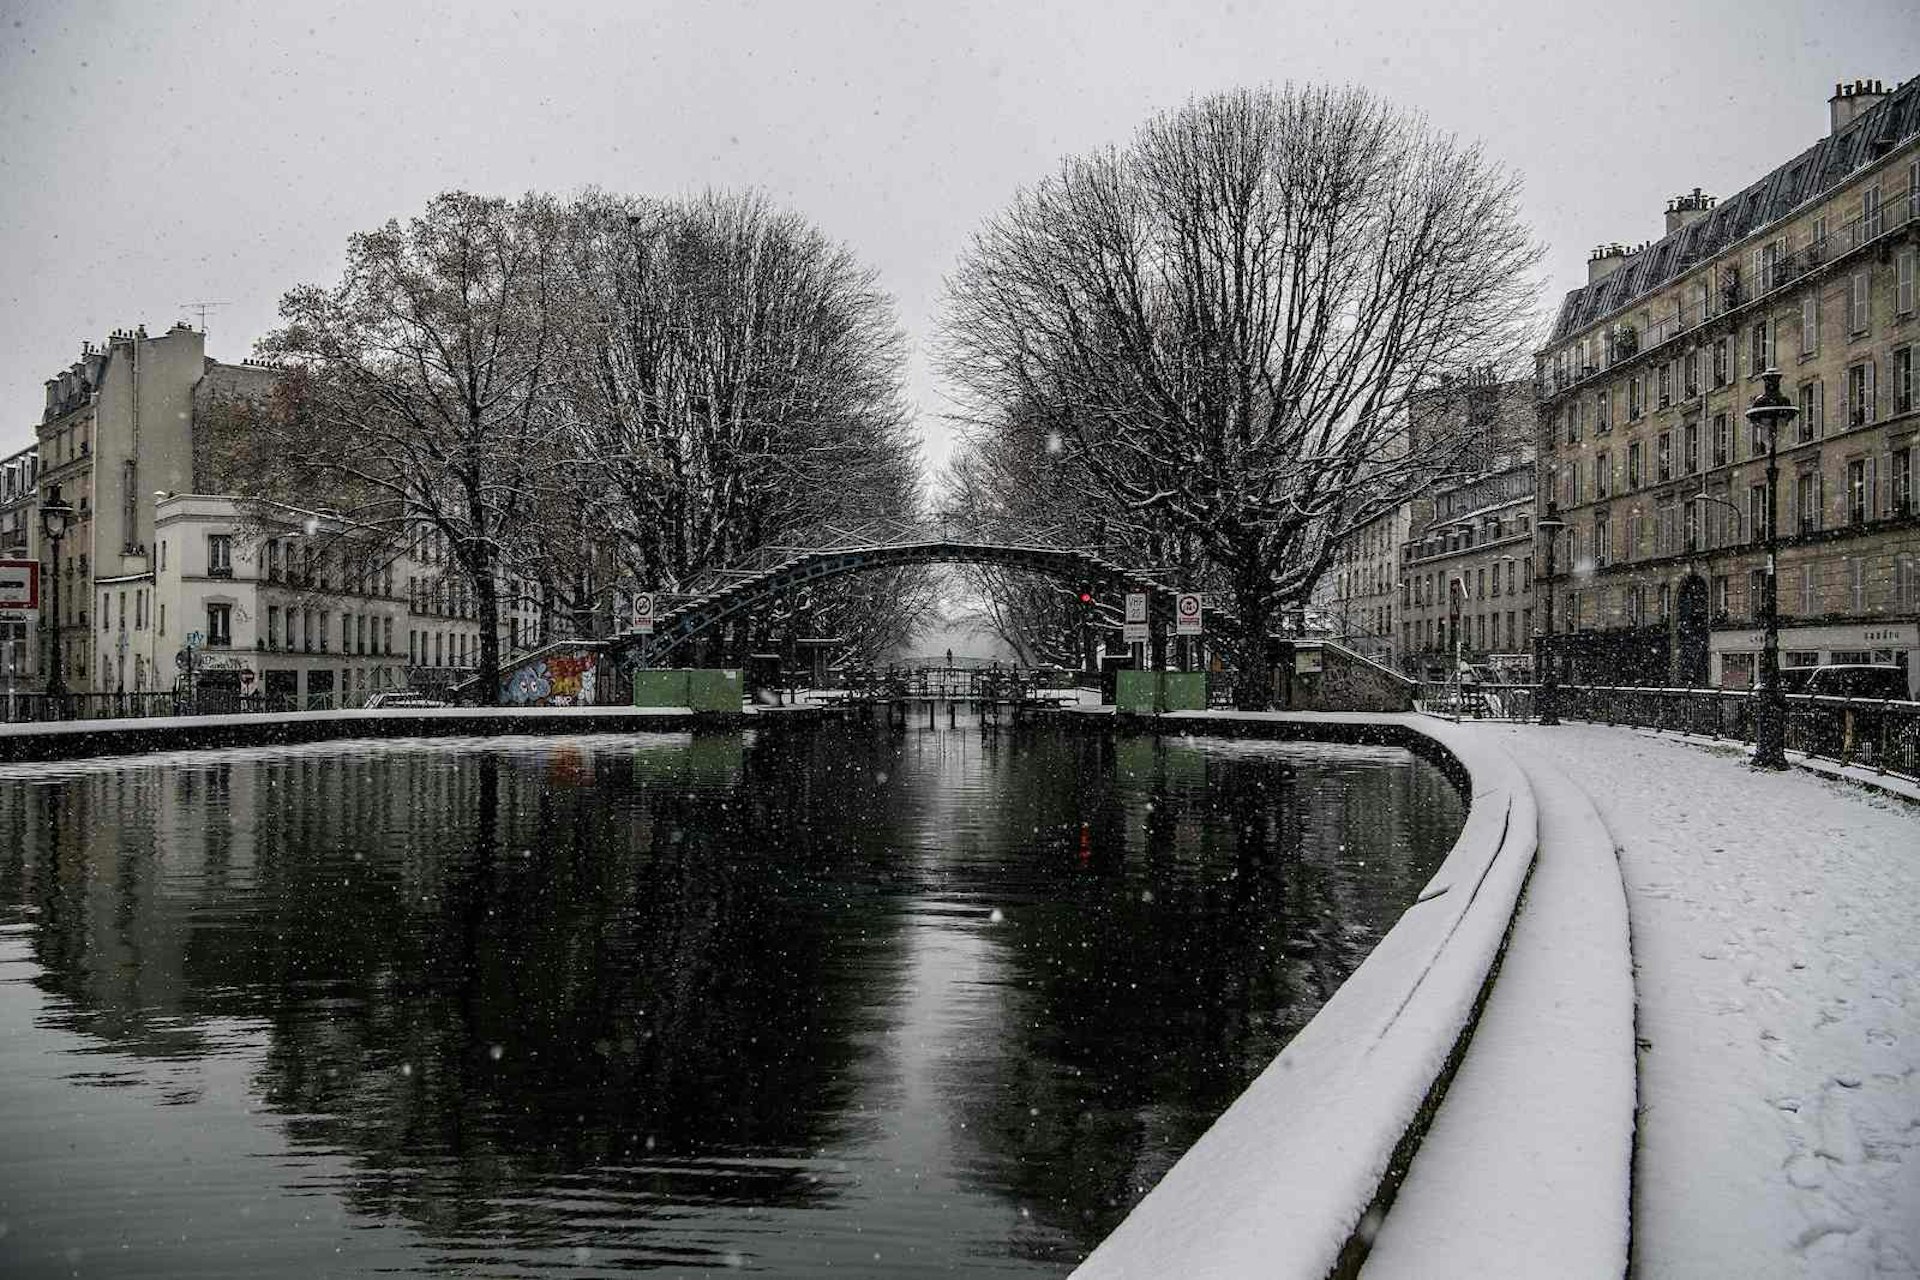  Snow falls over the canal Saint-Martin in Paris on January 22, 2019.